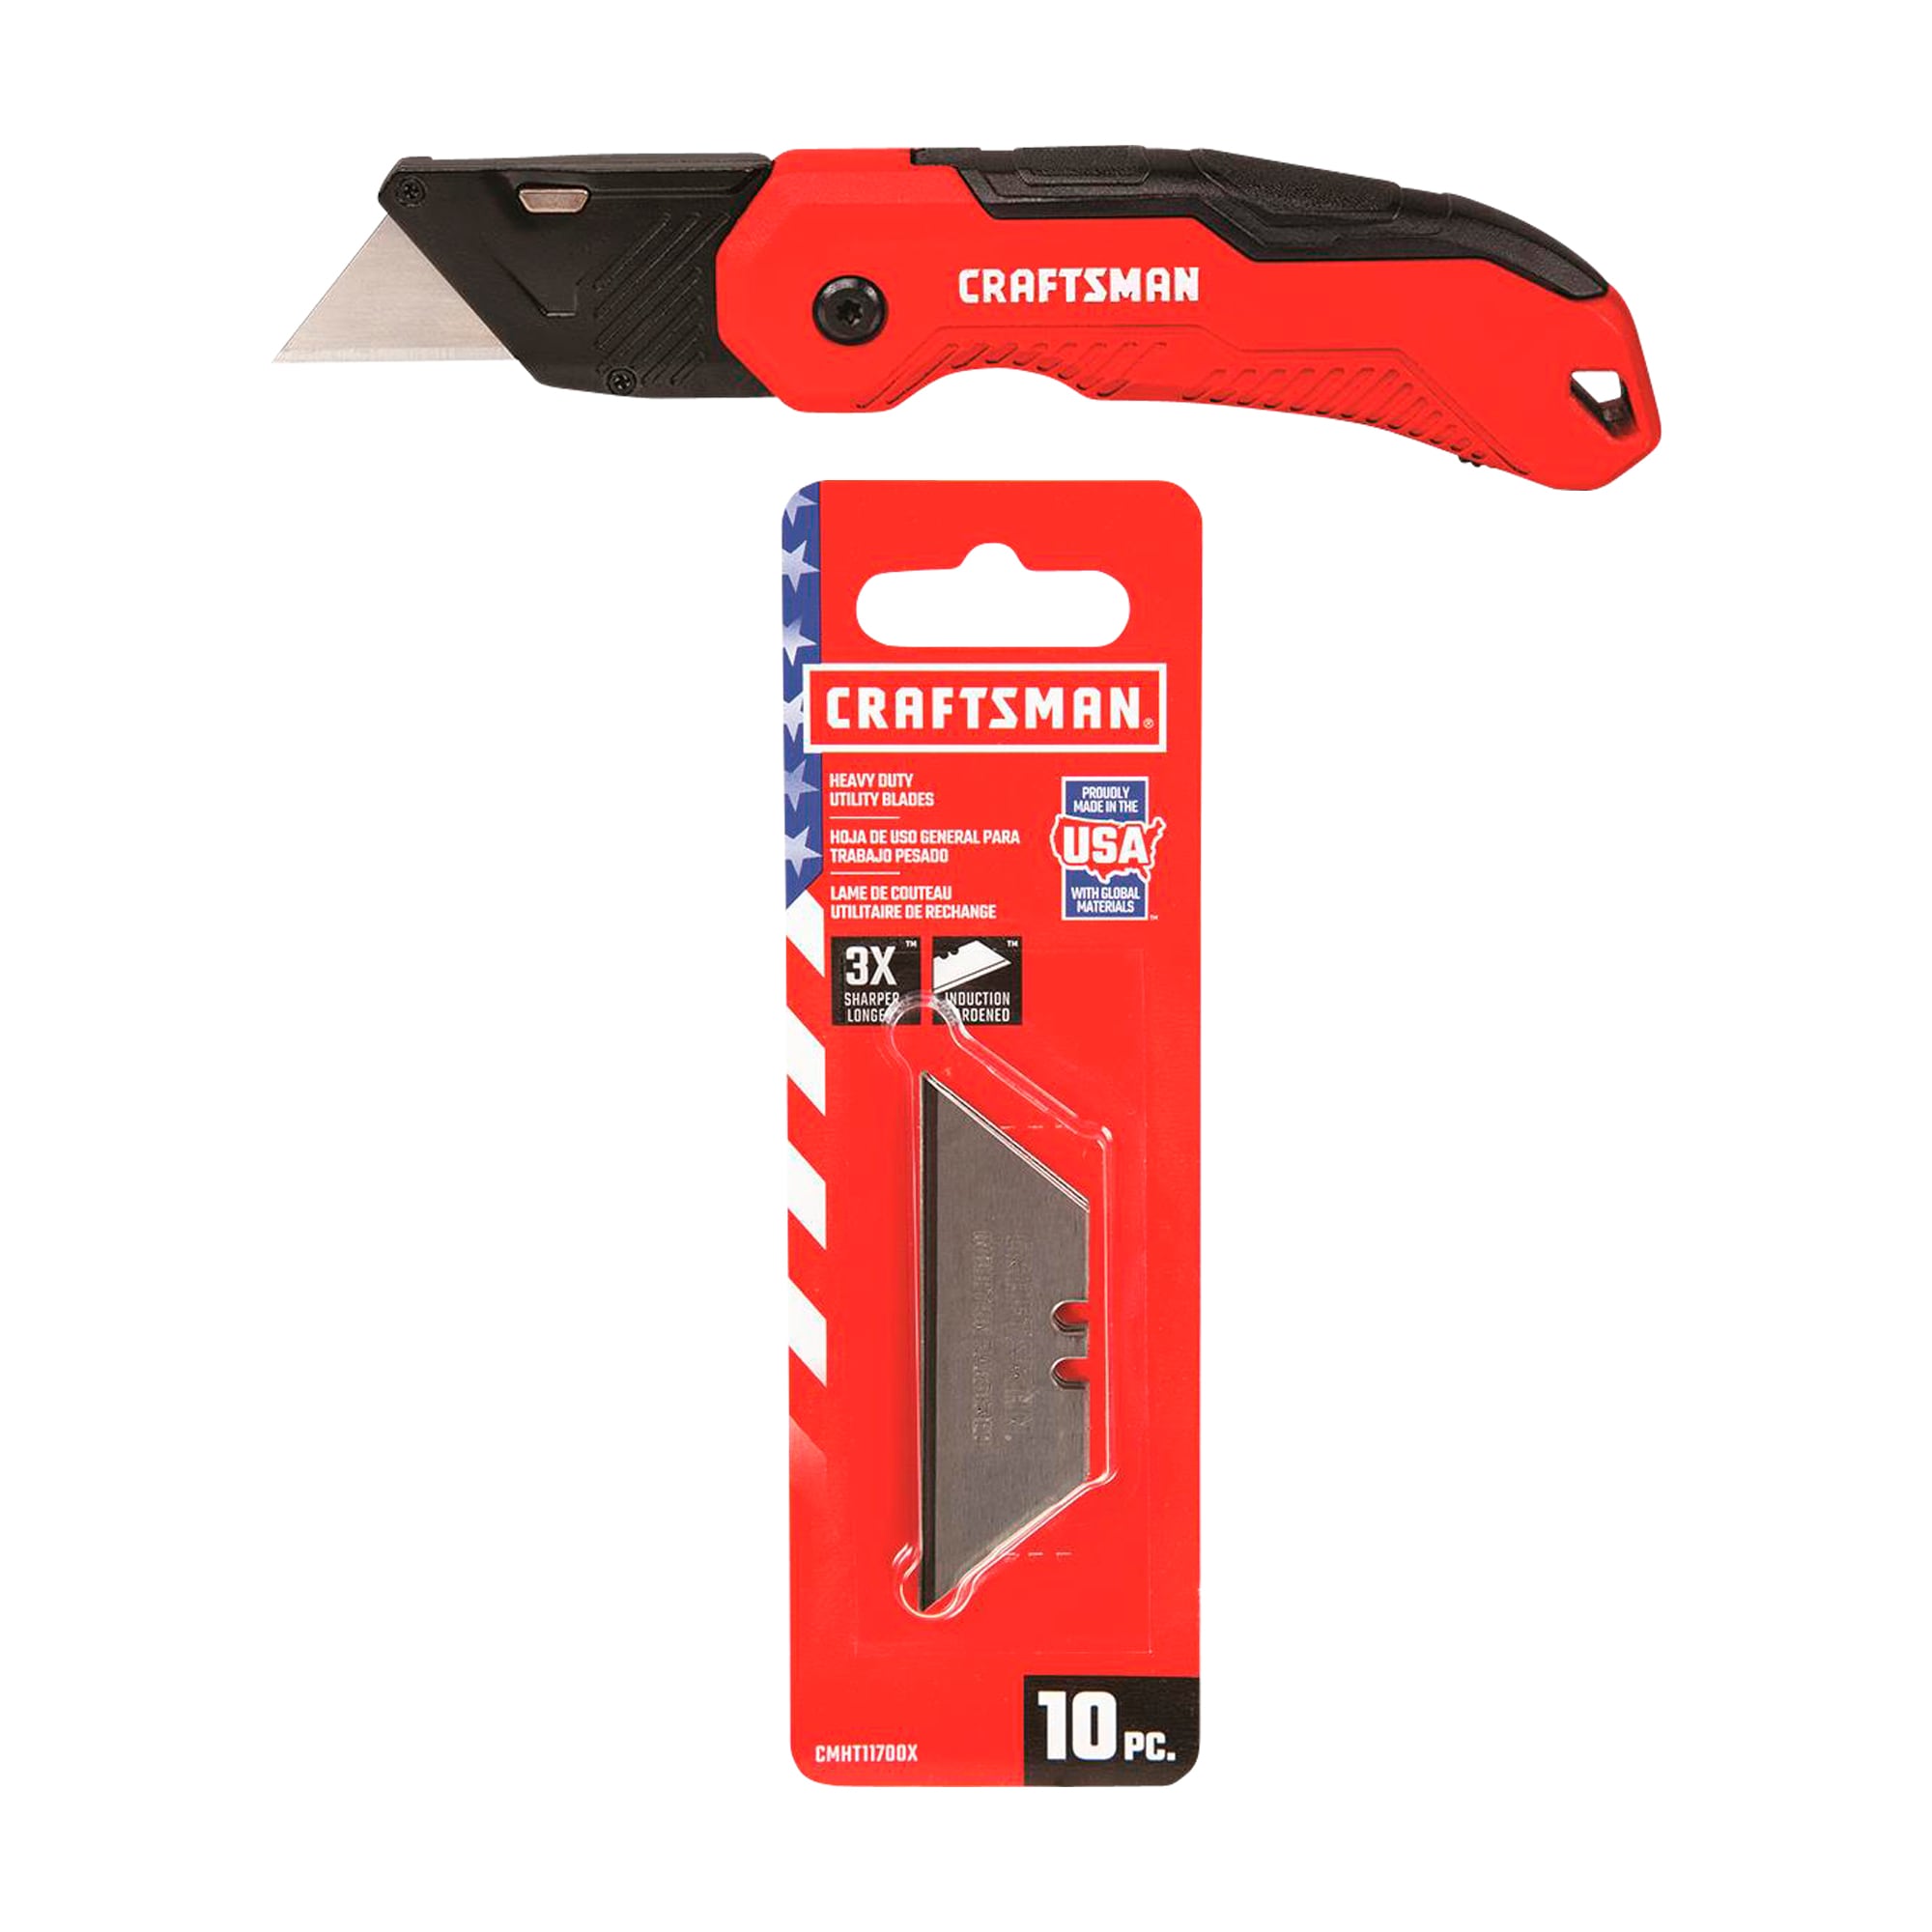 Compact Fixed Blade Folding Utility Knife (2-Pack)